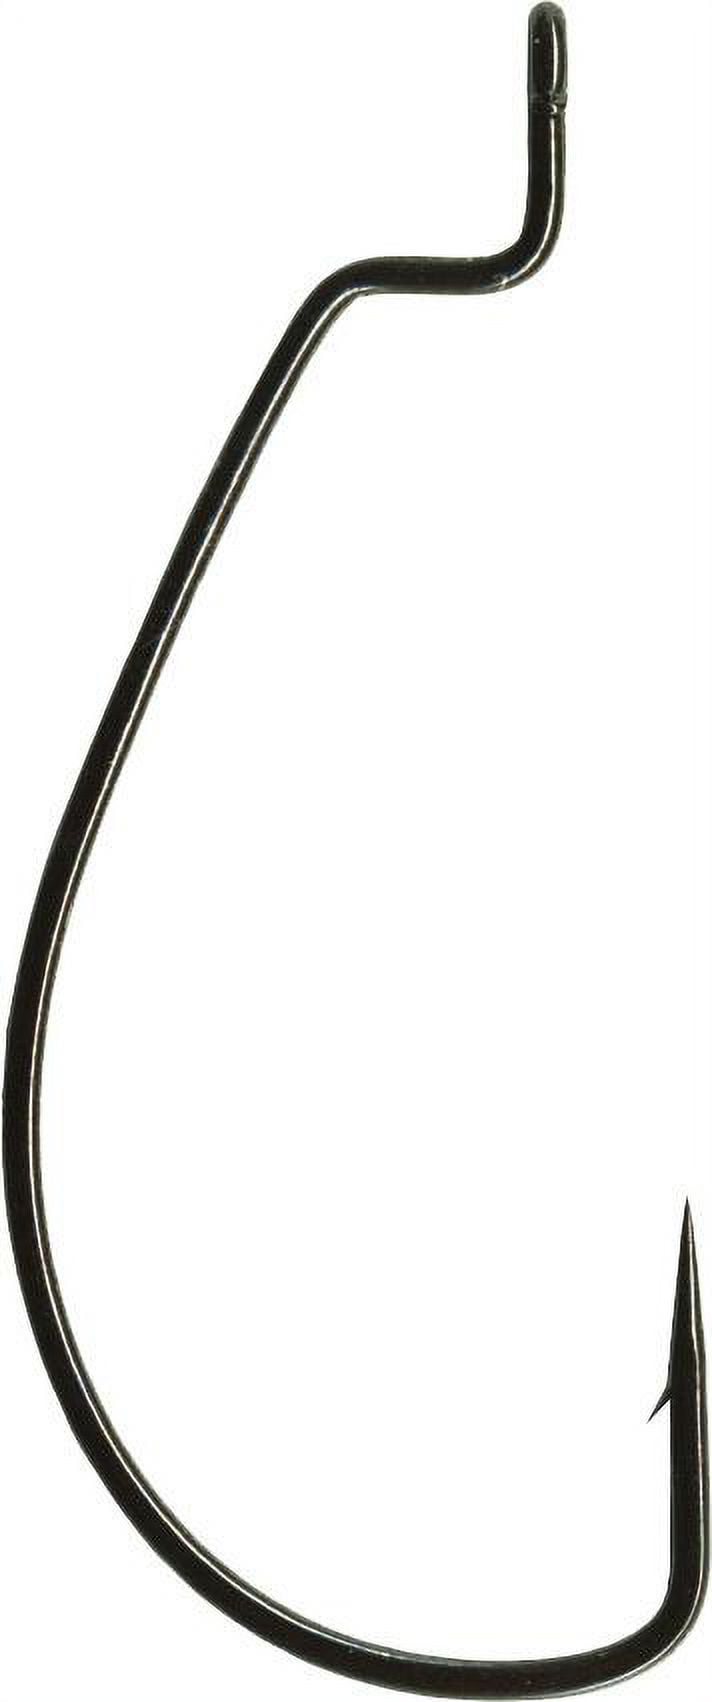 Gamakatsu Worm Offset EWG Hook in High Quality Carbon Steel, Size 4/0, NS  Black, 5-Pack 